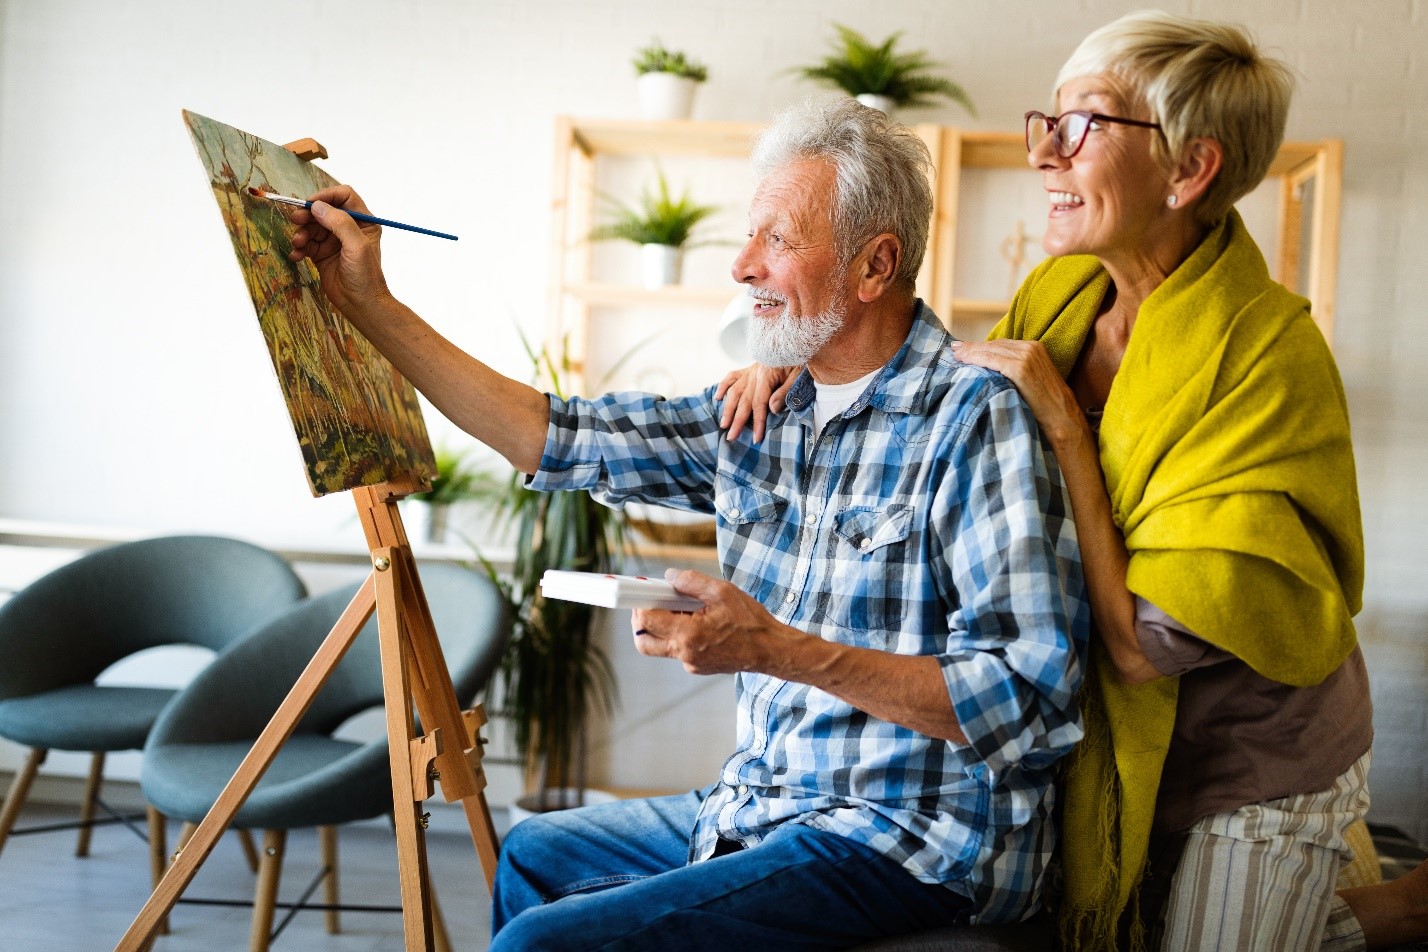 55 and older man painting on an easel while a woman cheers him on behind him